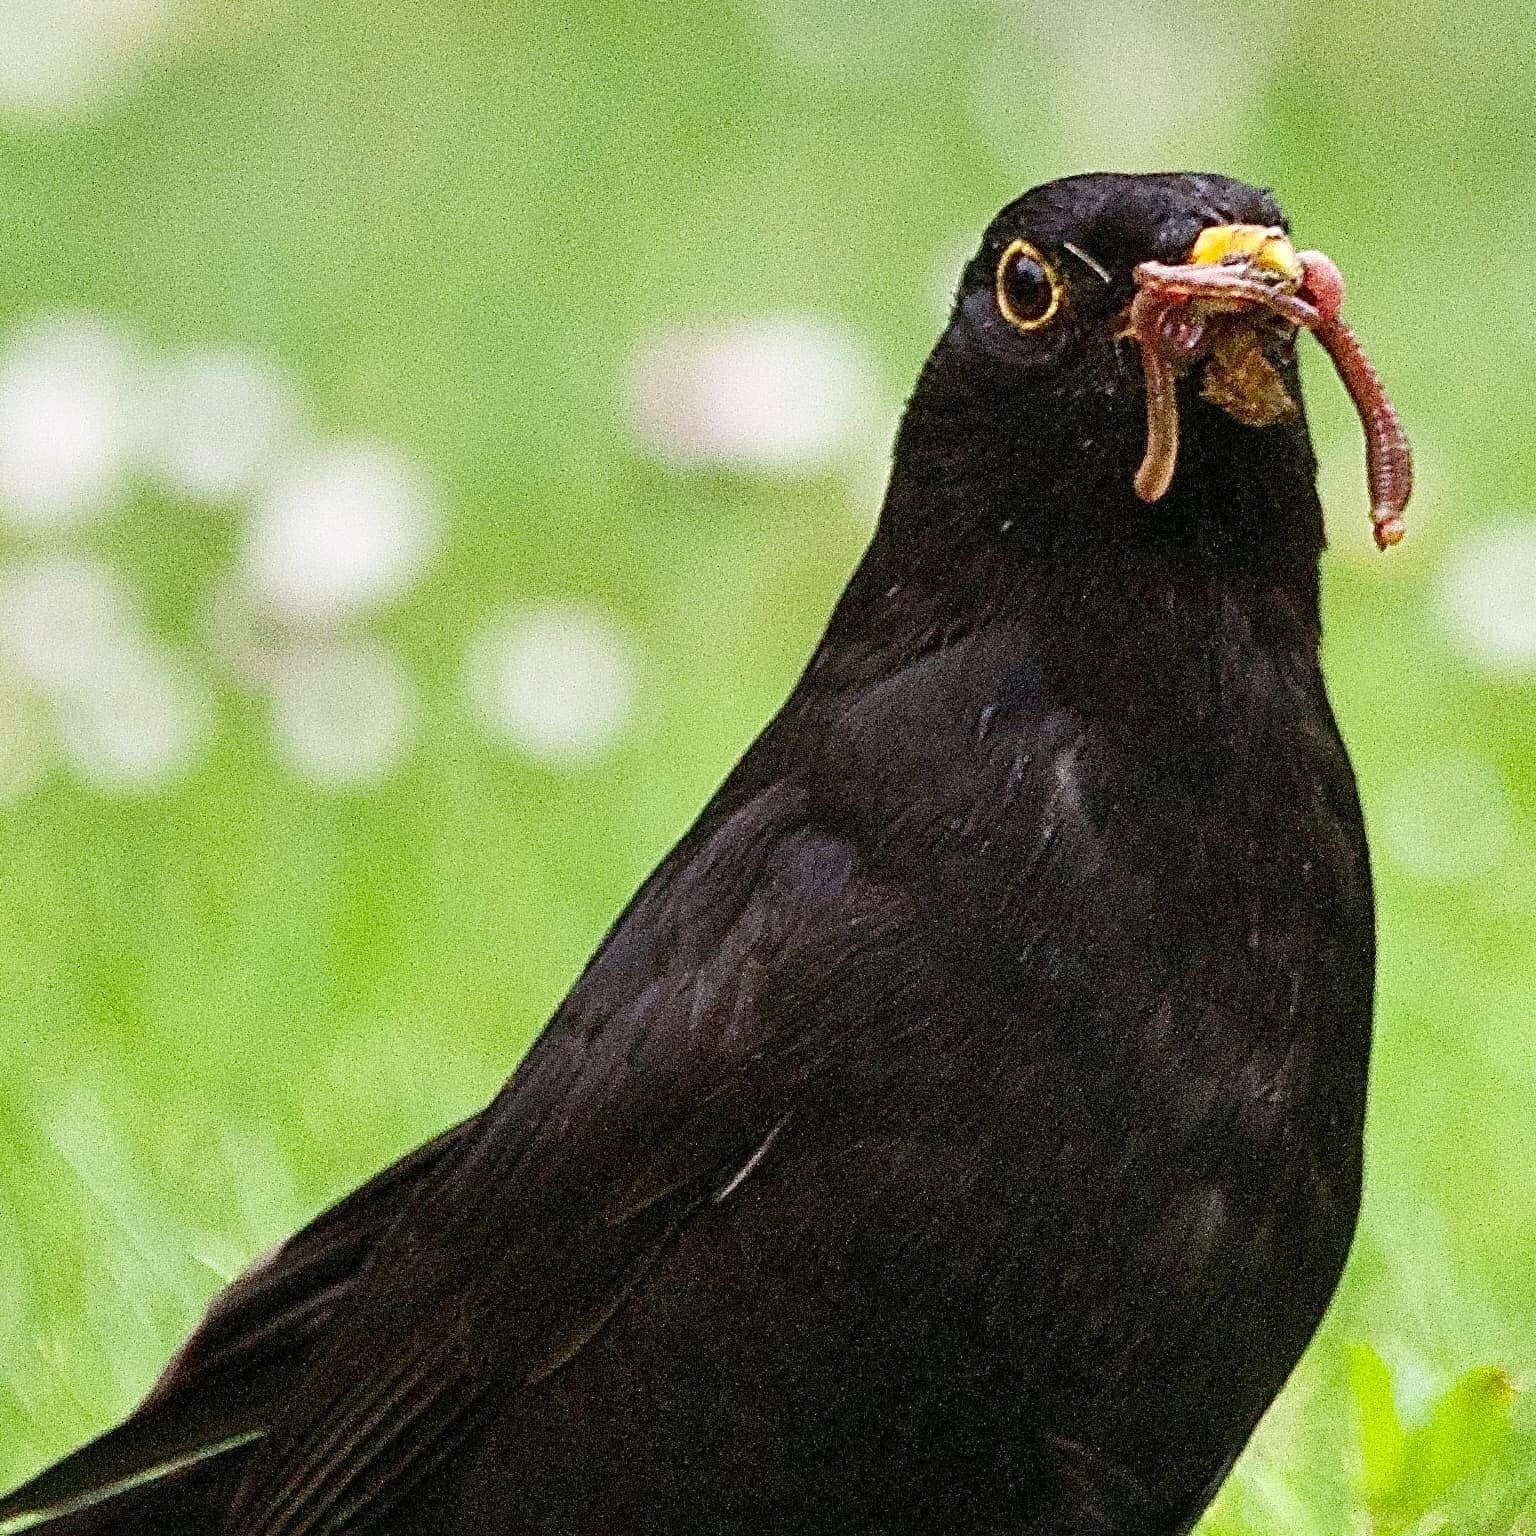 Have I got food around my mouth? (Paul Wright)